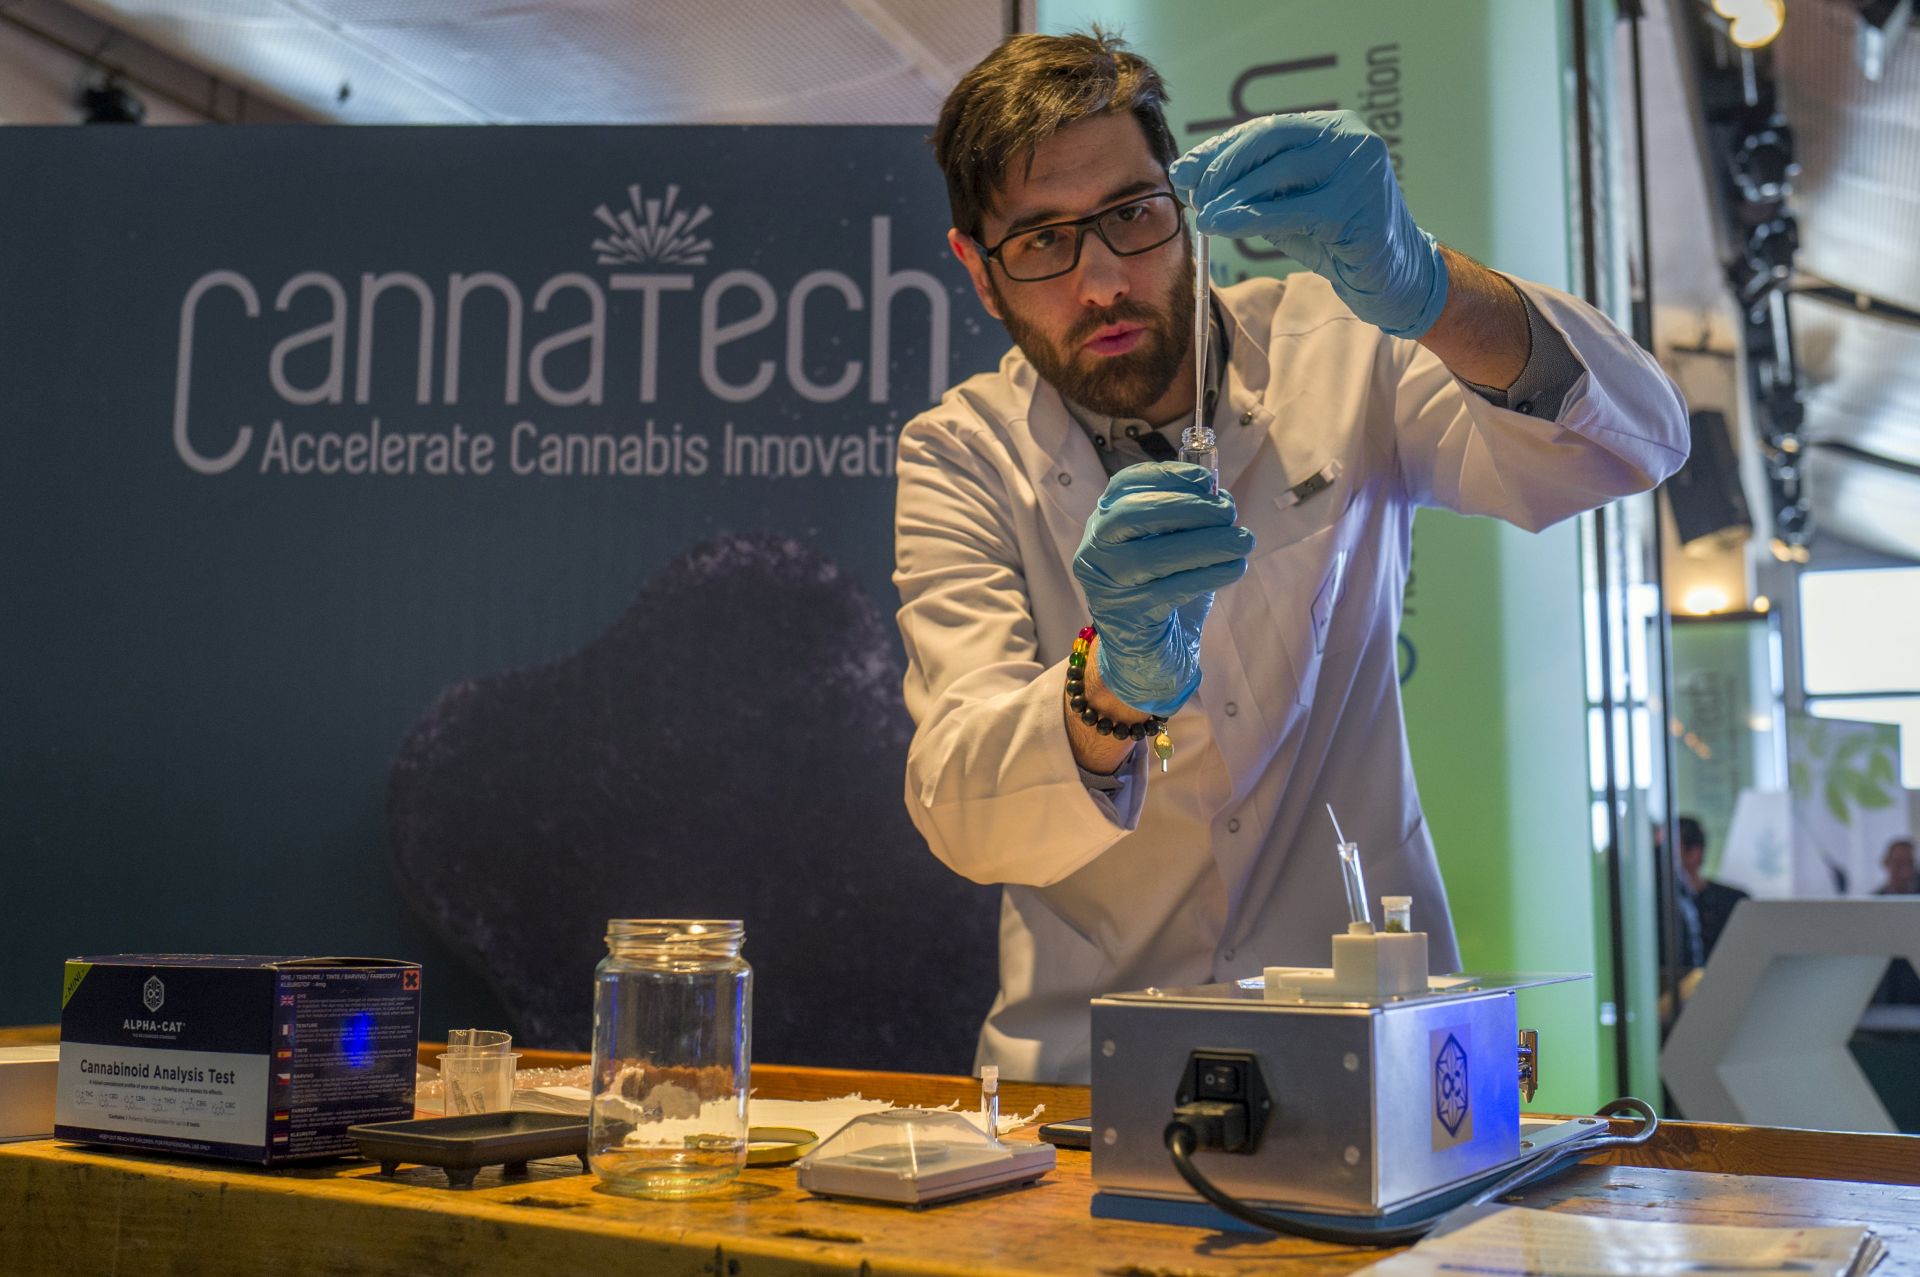 epa05860195 Sebastian Beguerie, from the French company Alpha-CAT, goes through a process to extract and measure the level of THC and Cannabinoids in medically grown cannabis during a presentation at the Cannatech conference in Tel Aviv, 20 March 2017. Cannatech is Israel's leading conference dealing with medical cannabis in all its phases from growing to extraction on THC and Cannabinoids to the preparation for distribution to medical patients such as cancer patients and people suffering from post-traumatic stress disorder (PTSD).  EPA/JIM HOLLANDER